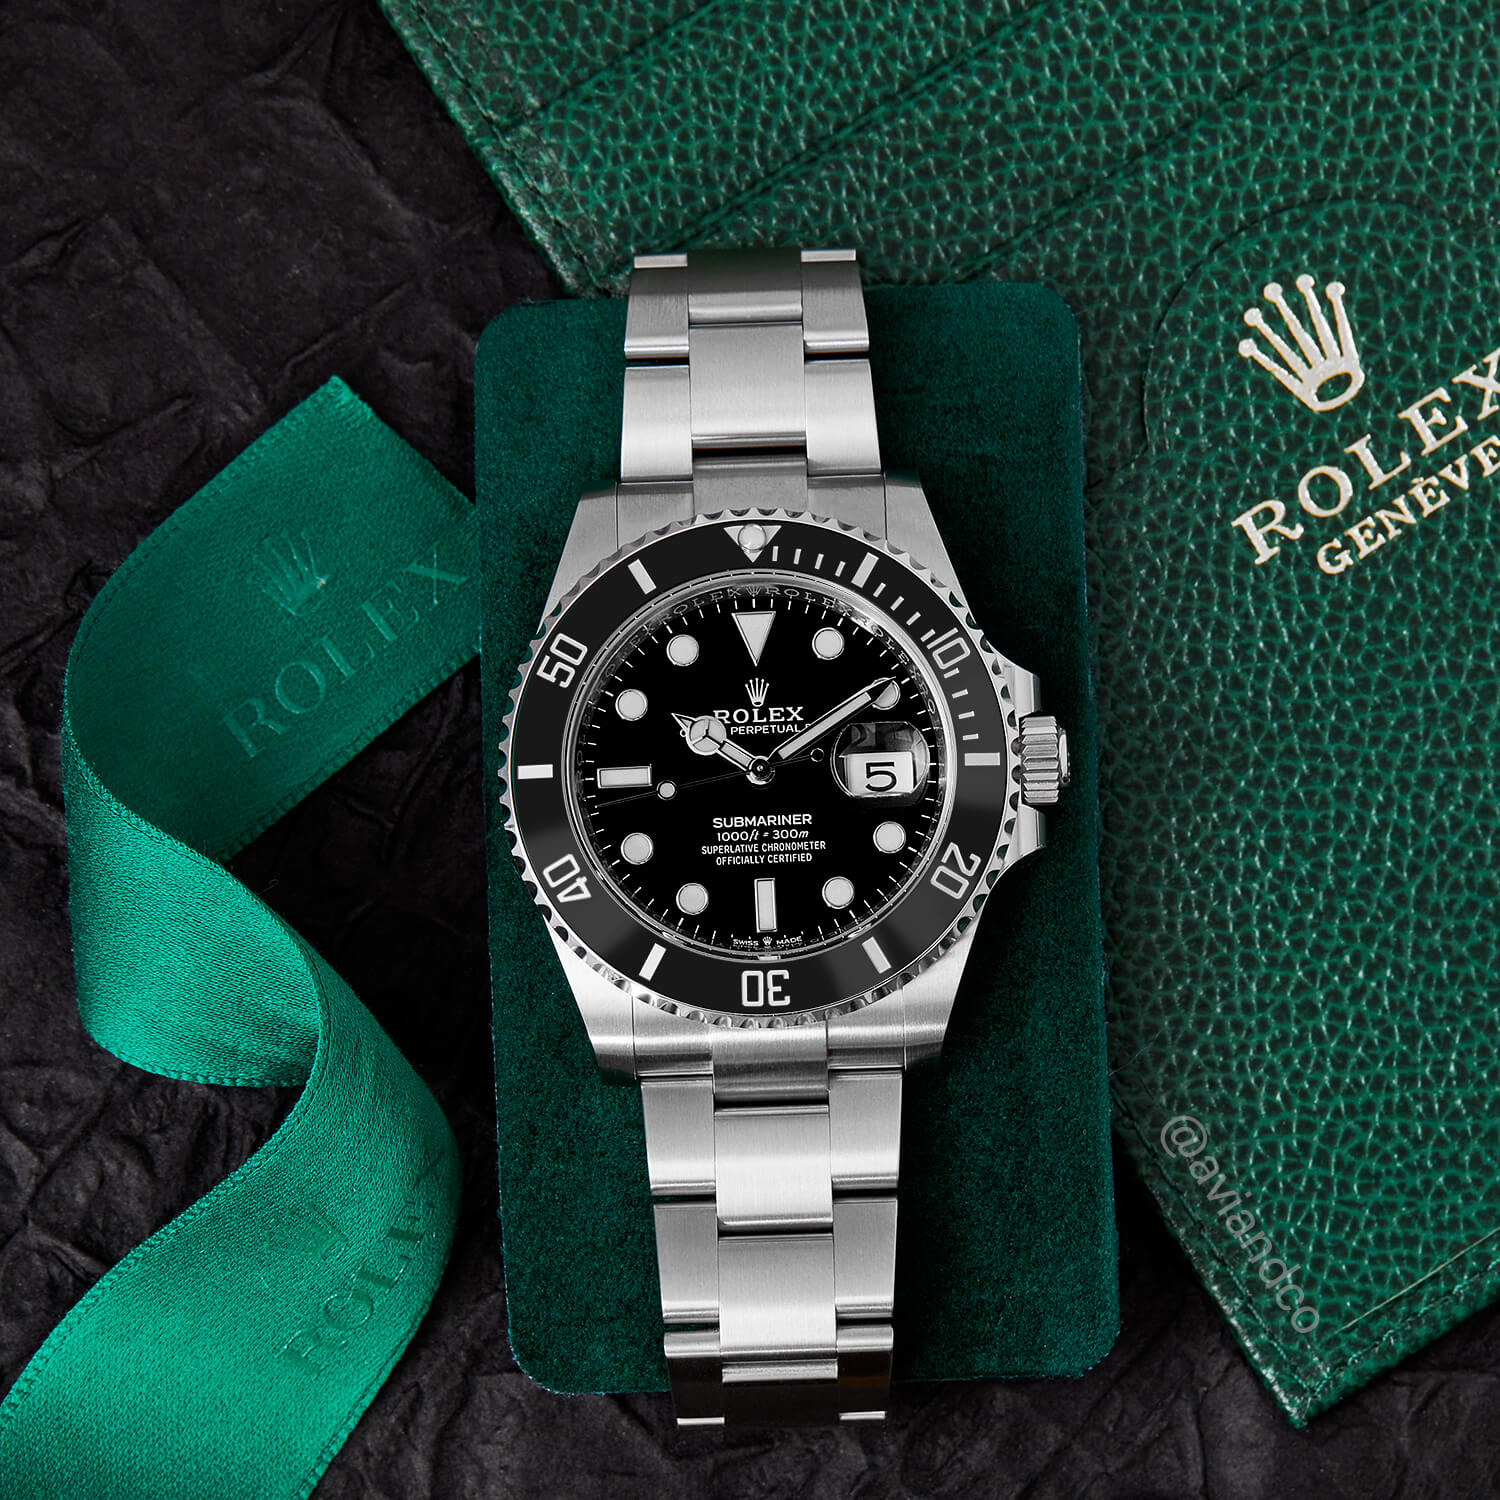 40 mm Rolex Submariner with Black Dial, Black Bezel, Index Hour Markers, and a Date Function.